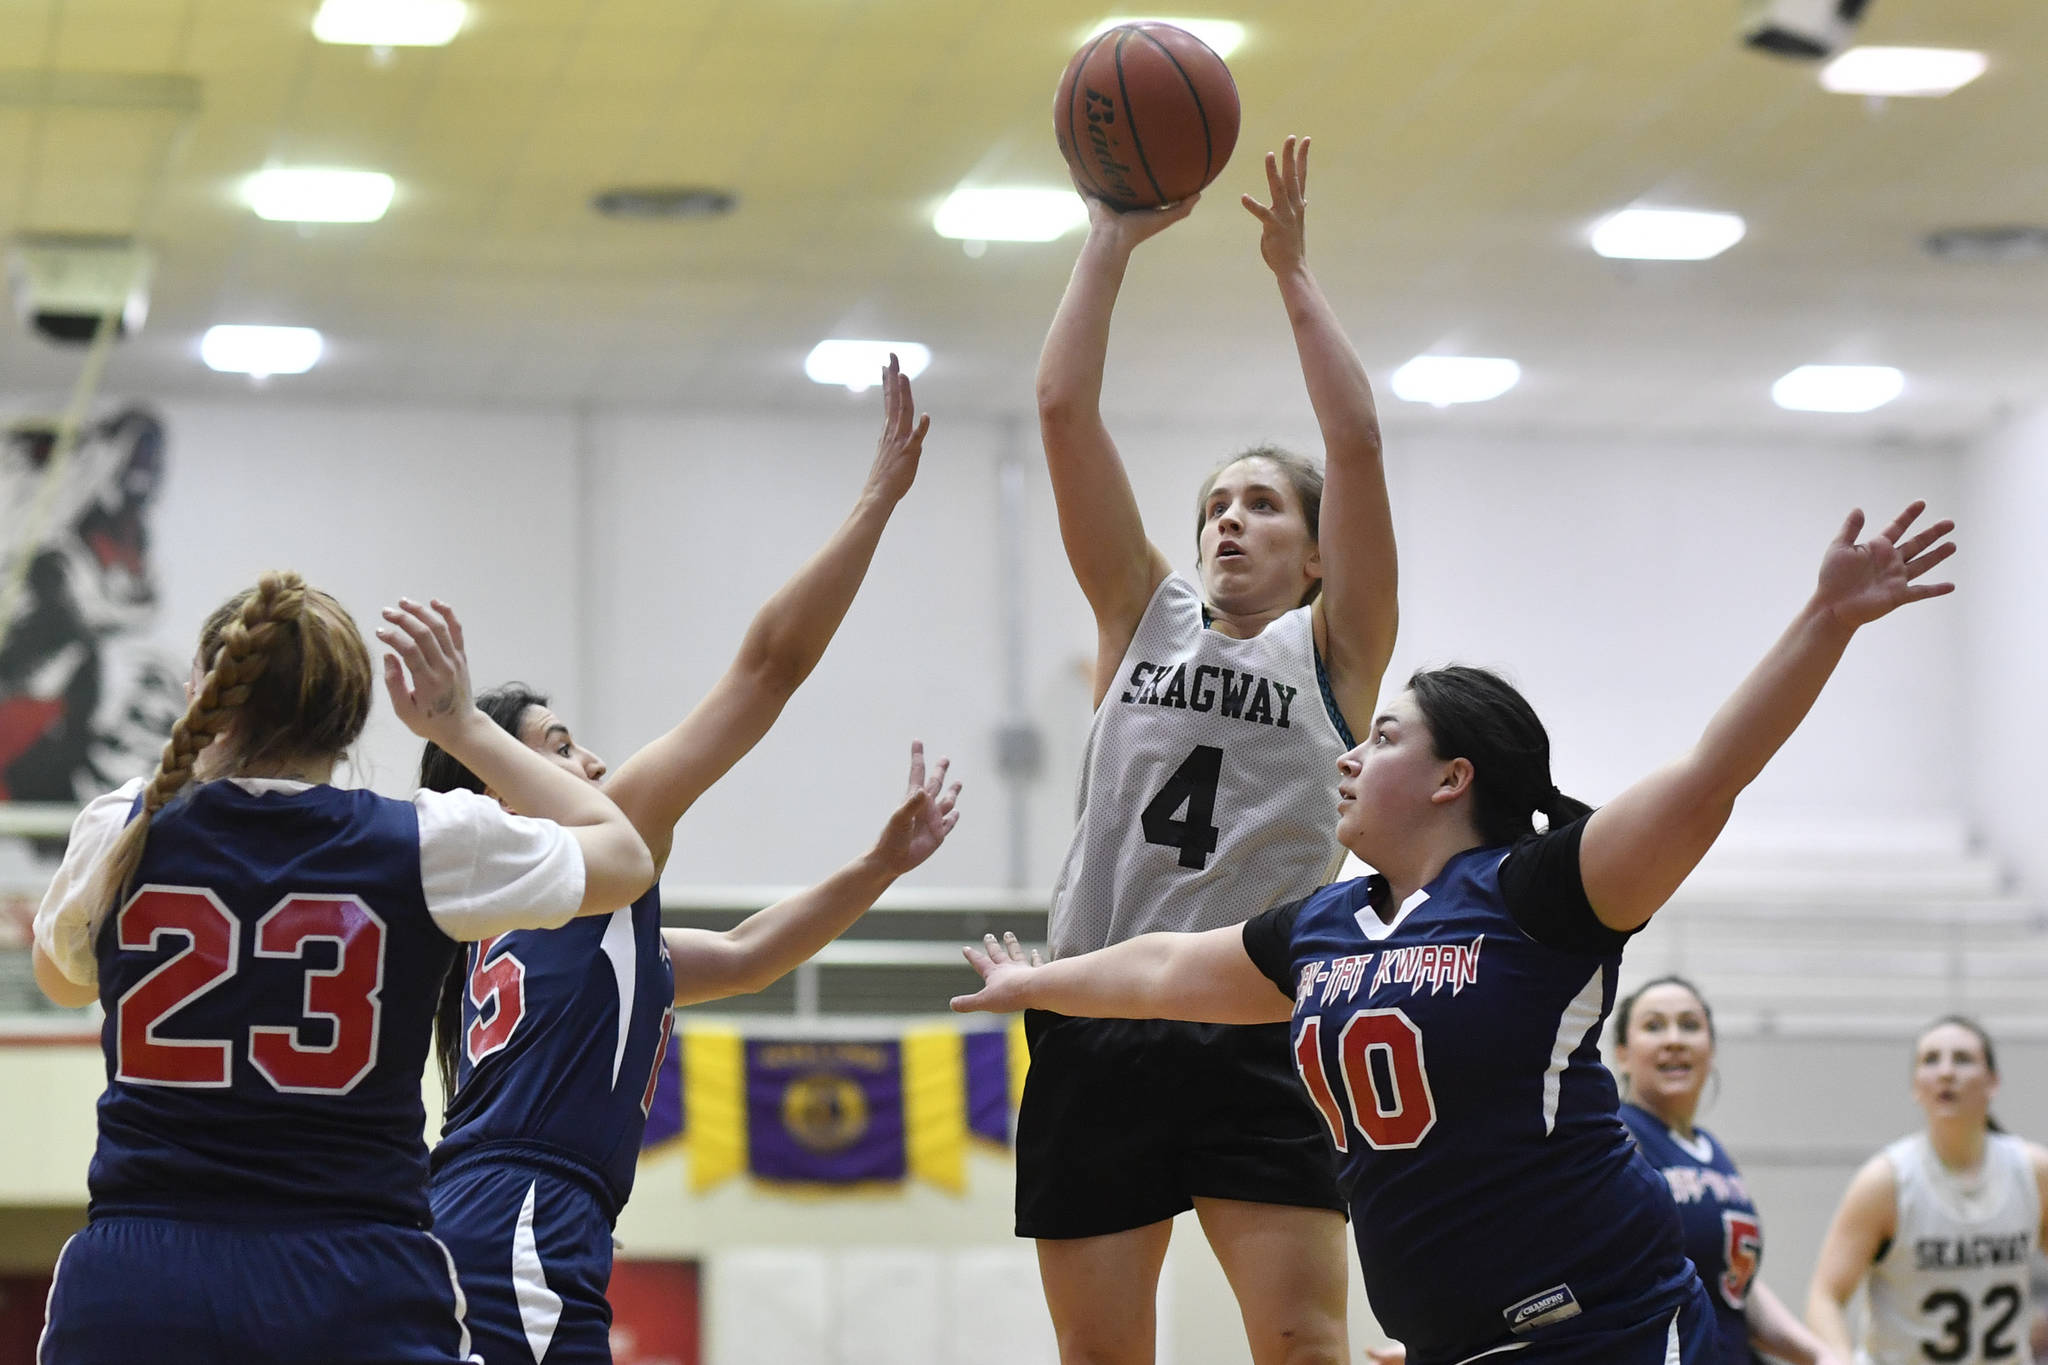 Haines’ Liz Segars, center, powers her way between Yakutat ‘s Violet Slatterly, left, and Janie Jensen at the Gold Medal Basketball Tournament on Friday, March 22, 2019. (Michael Penn | Juneau Empire)                                Skagway’s Kailyn Jerod shoots over Yakutat’s Cheyenne Ekis, left, Lorena Williams, center, and Nadine Fraker during the women’s bracket game at the Gold Medal Basketball Tournament on Thursday, March 21, 2019. (Michael Penn | Juneau Empire)